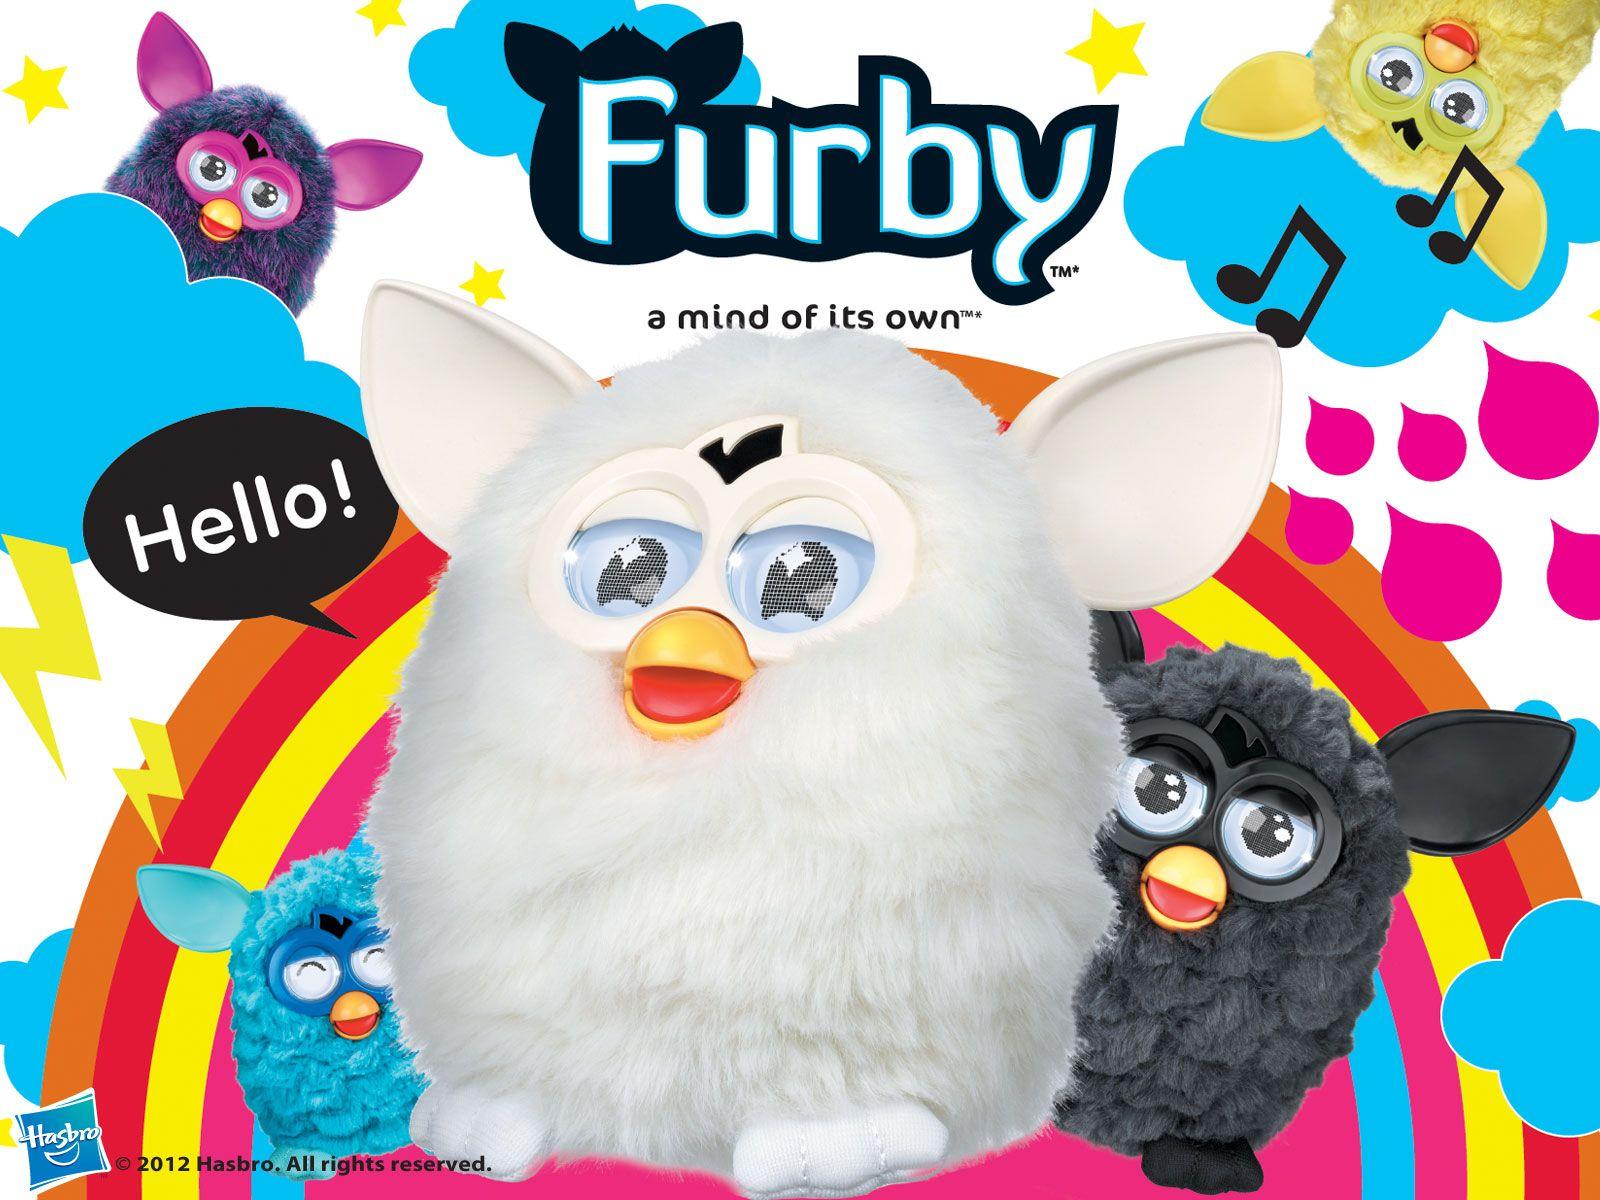 Furby mind of its own